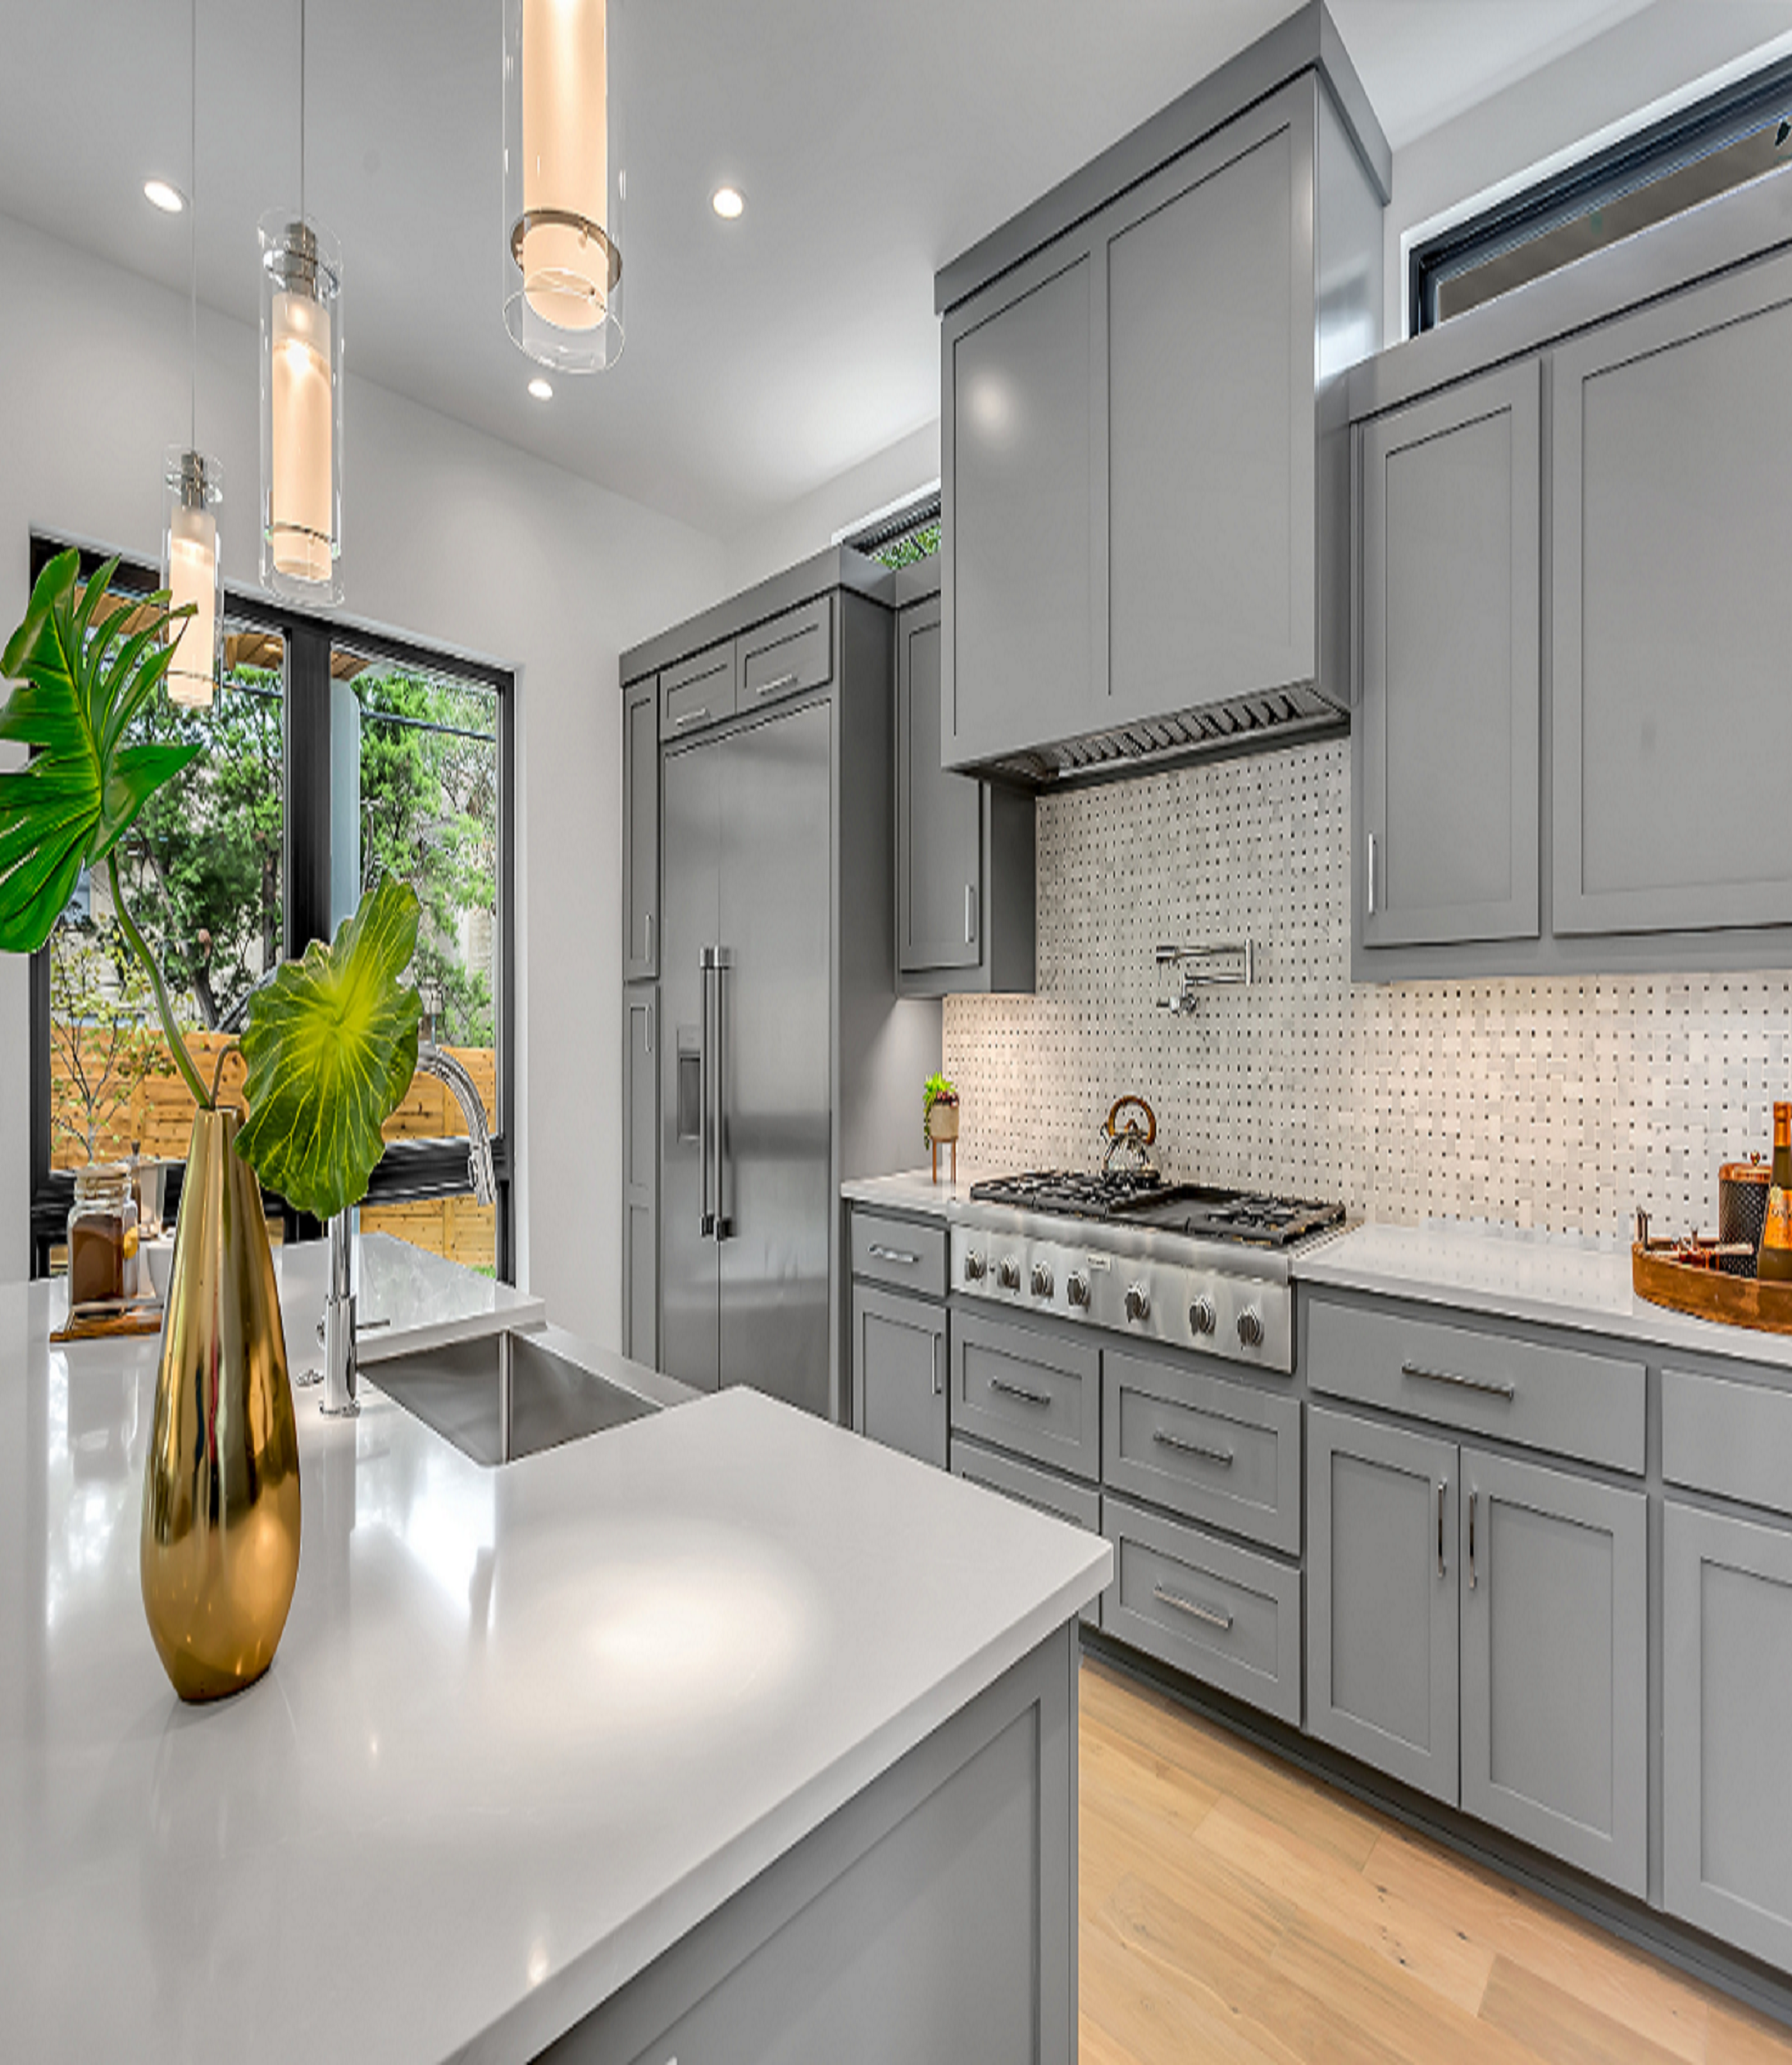 Here’s why you should choose quartz countertops for your kitchen Main Image